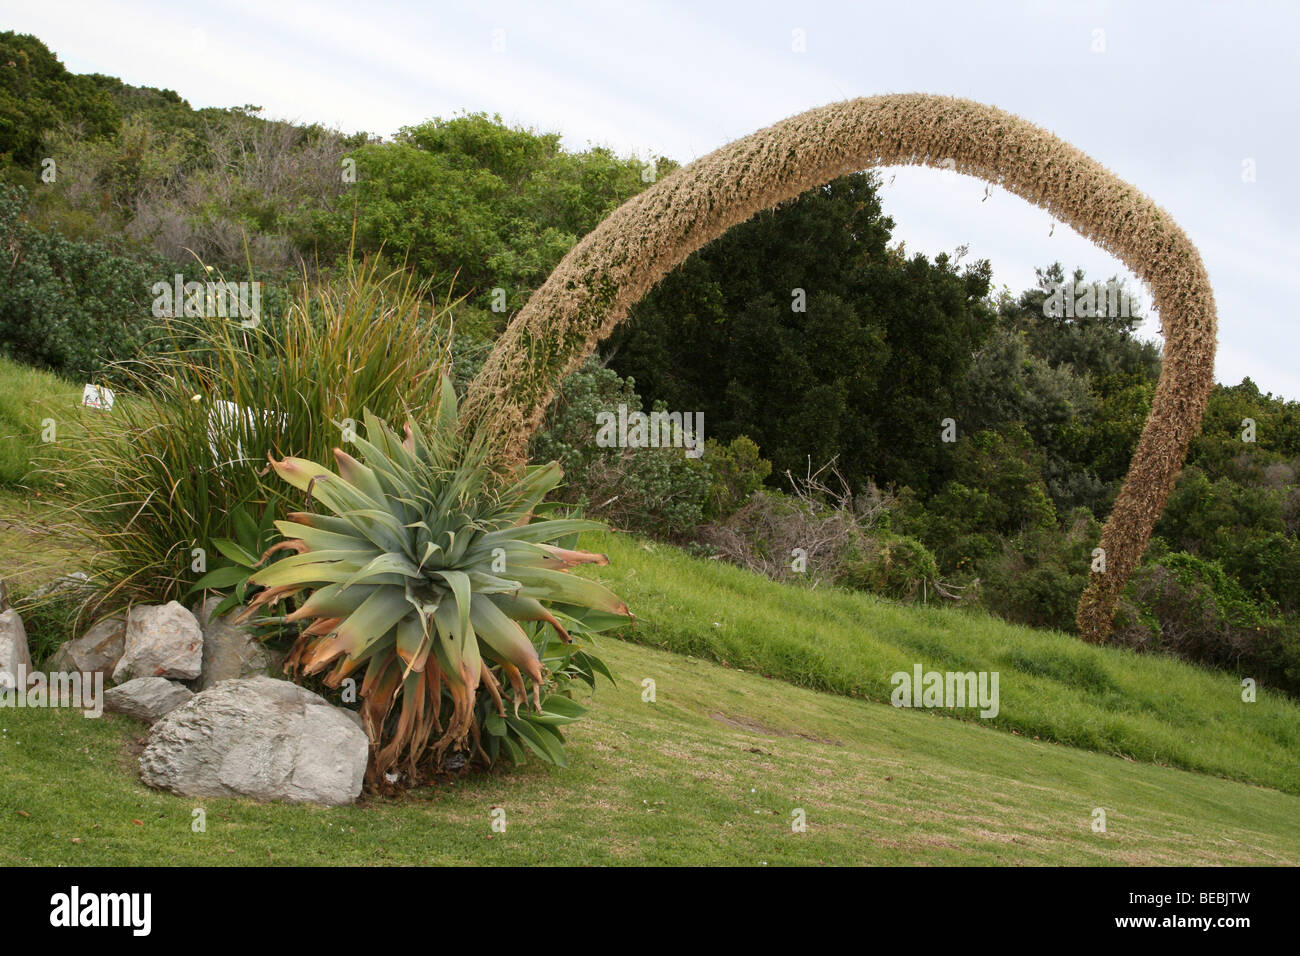 Flowering Swan's Neck Agave attenuata A Native Mexican Plant, Taken in Hermanus, South Africa Stock Photo